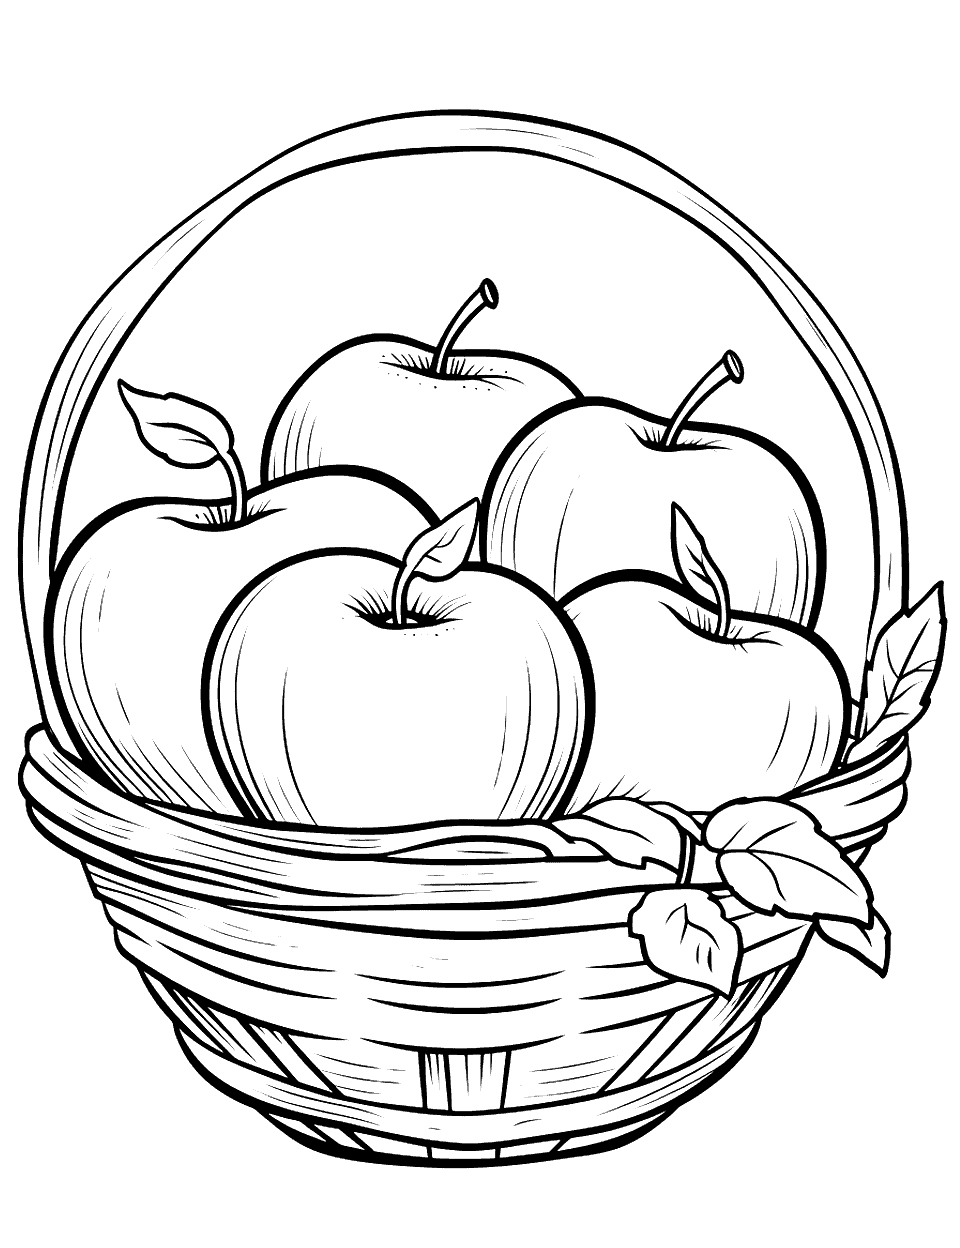 Basket Full of Apples Apple Coloring Page - A basket overflowing with apples of different sizes.